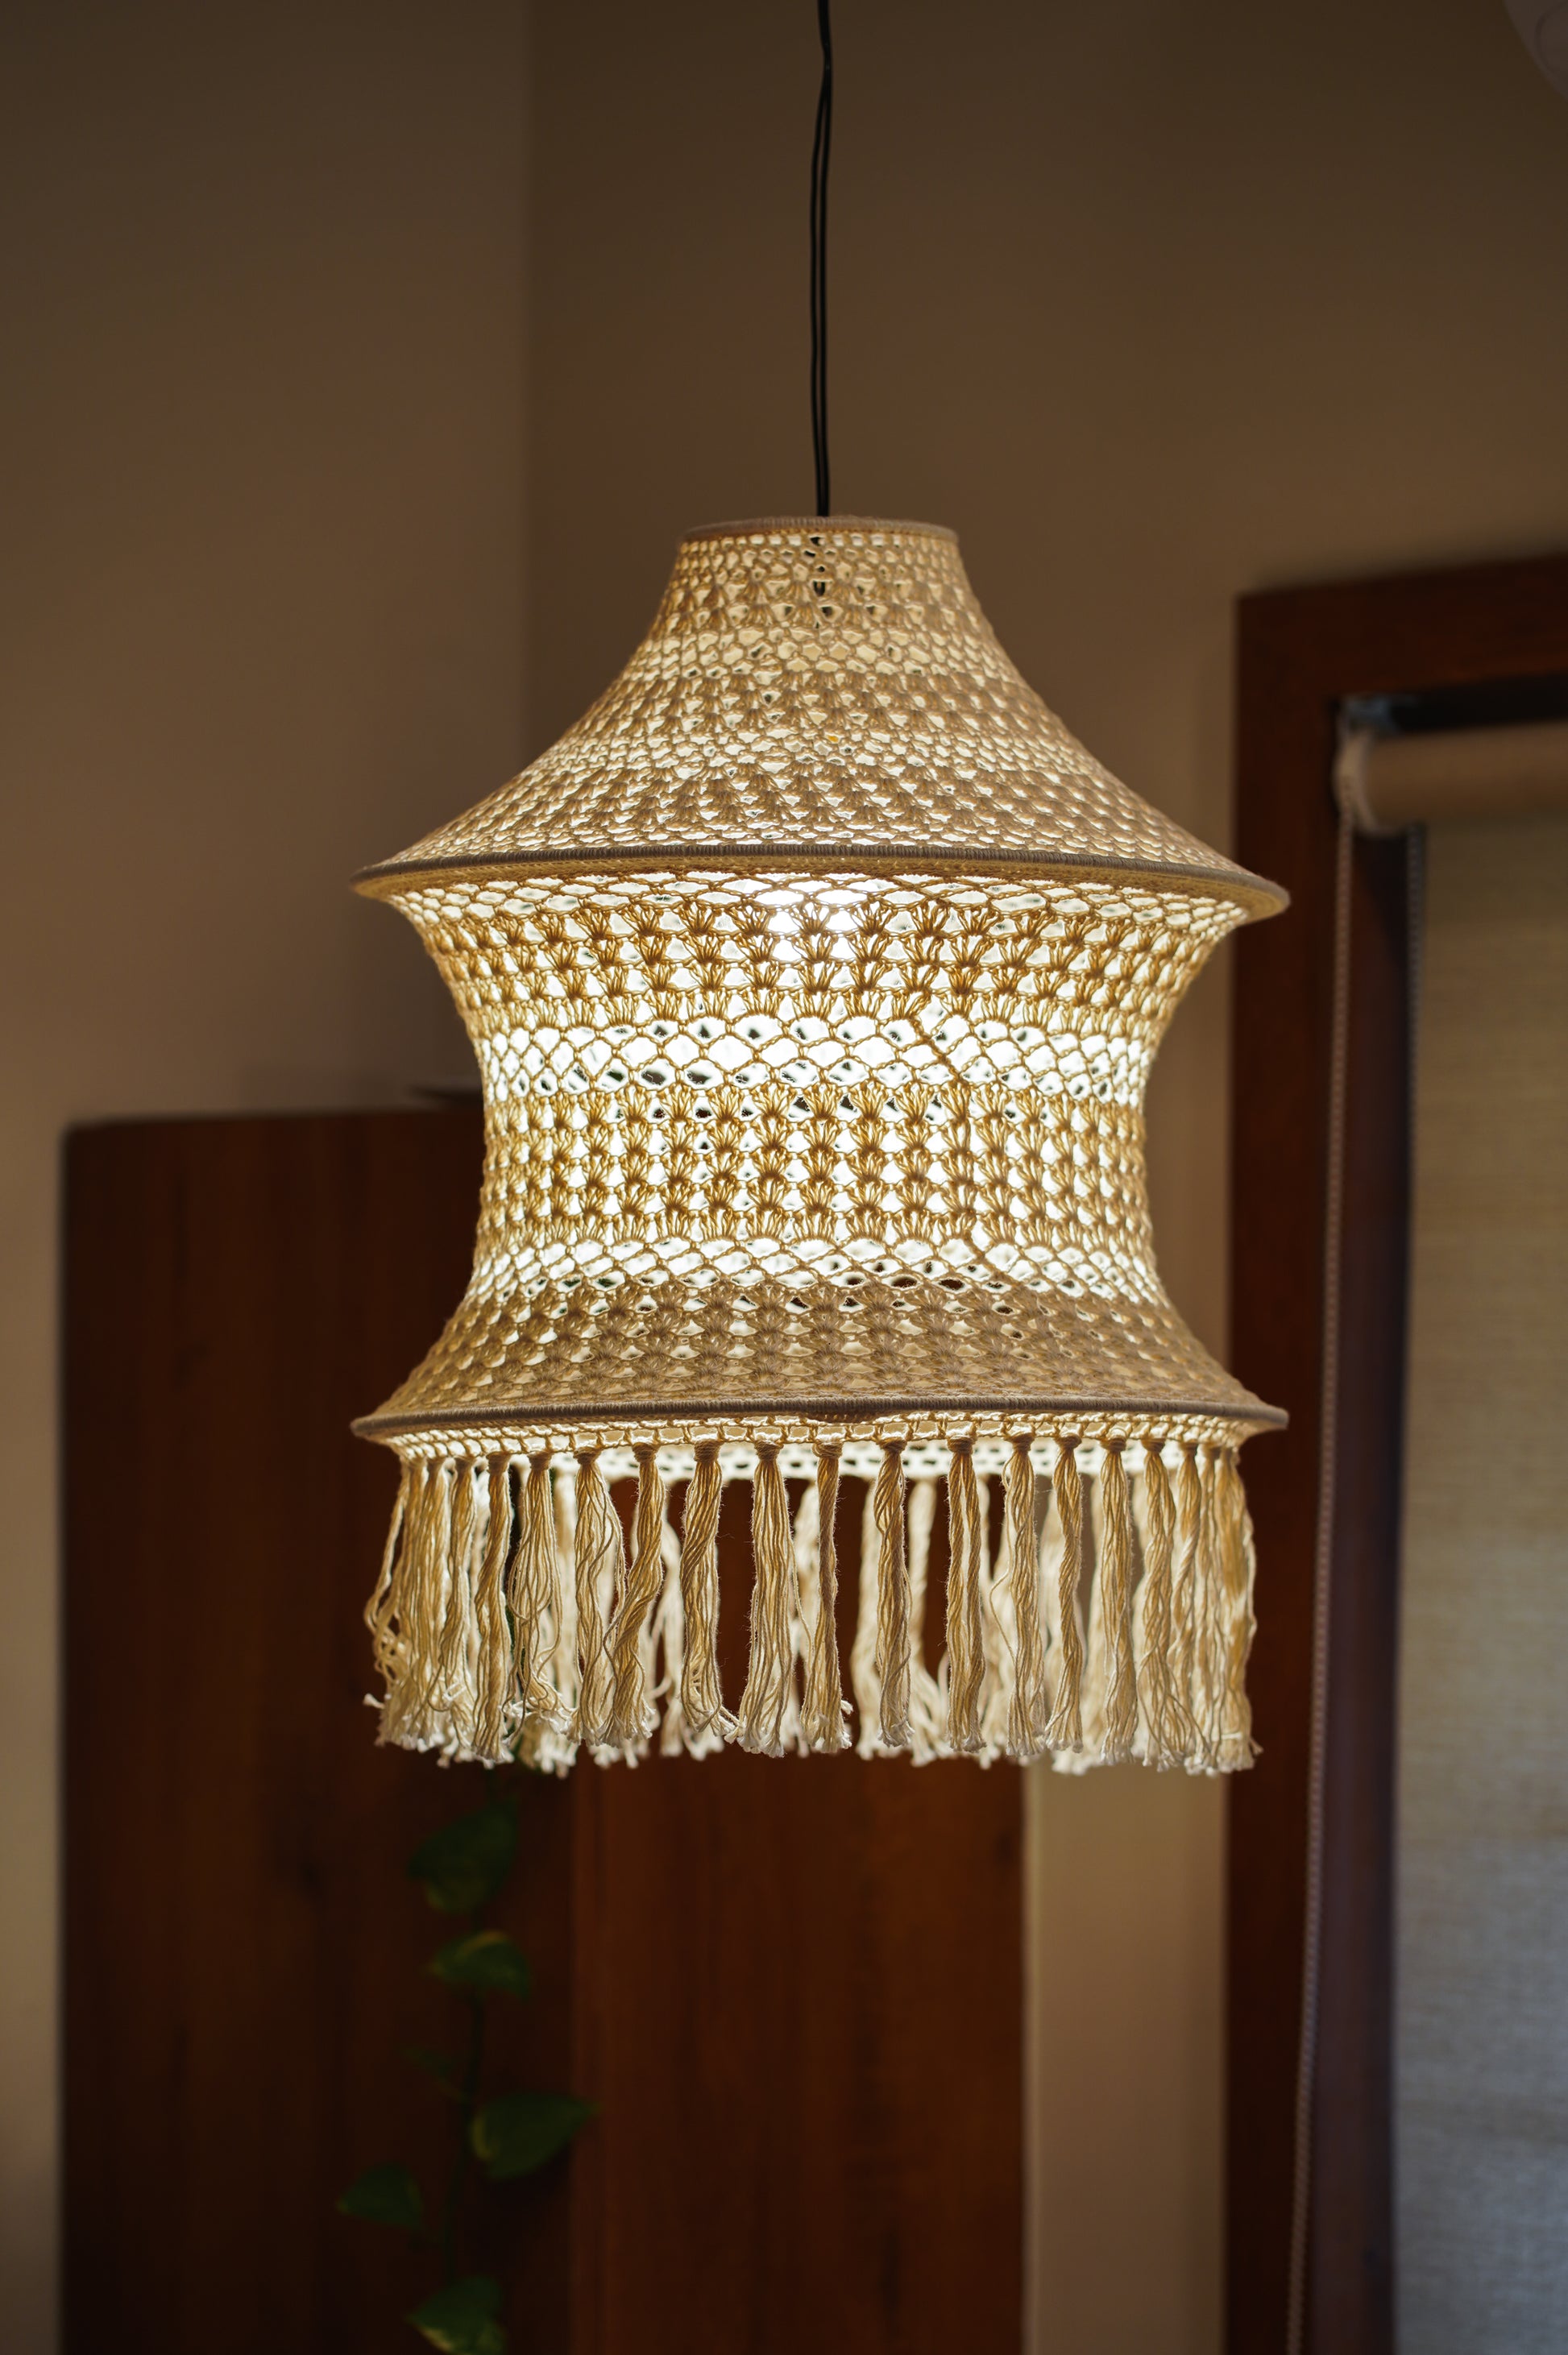 Tesu lamp made with detailed handwork of crochet by our skilled artisans. It can be styled in any corner of your house and will look gorgeous.&nbsp; Best used with warm white light to bring the peaceful bohemian vibe to your space.&nbsp; We love using these lamps over our dining table for celebratory dinners and on the bedside corners.